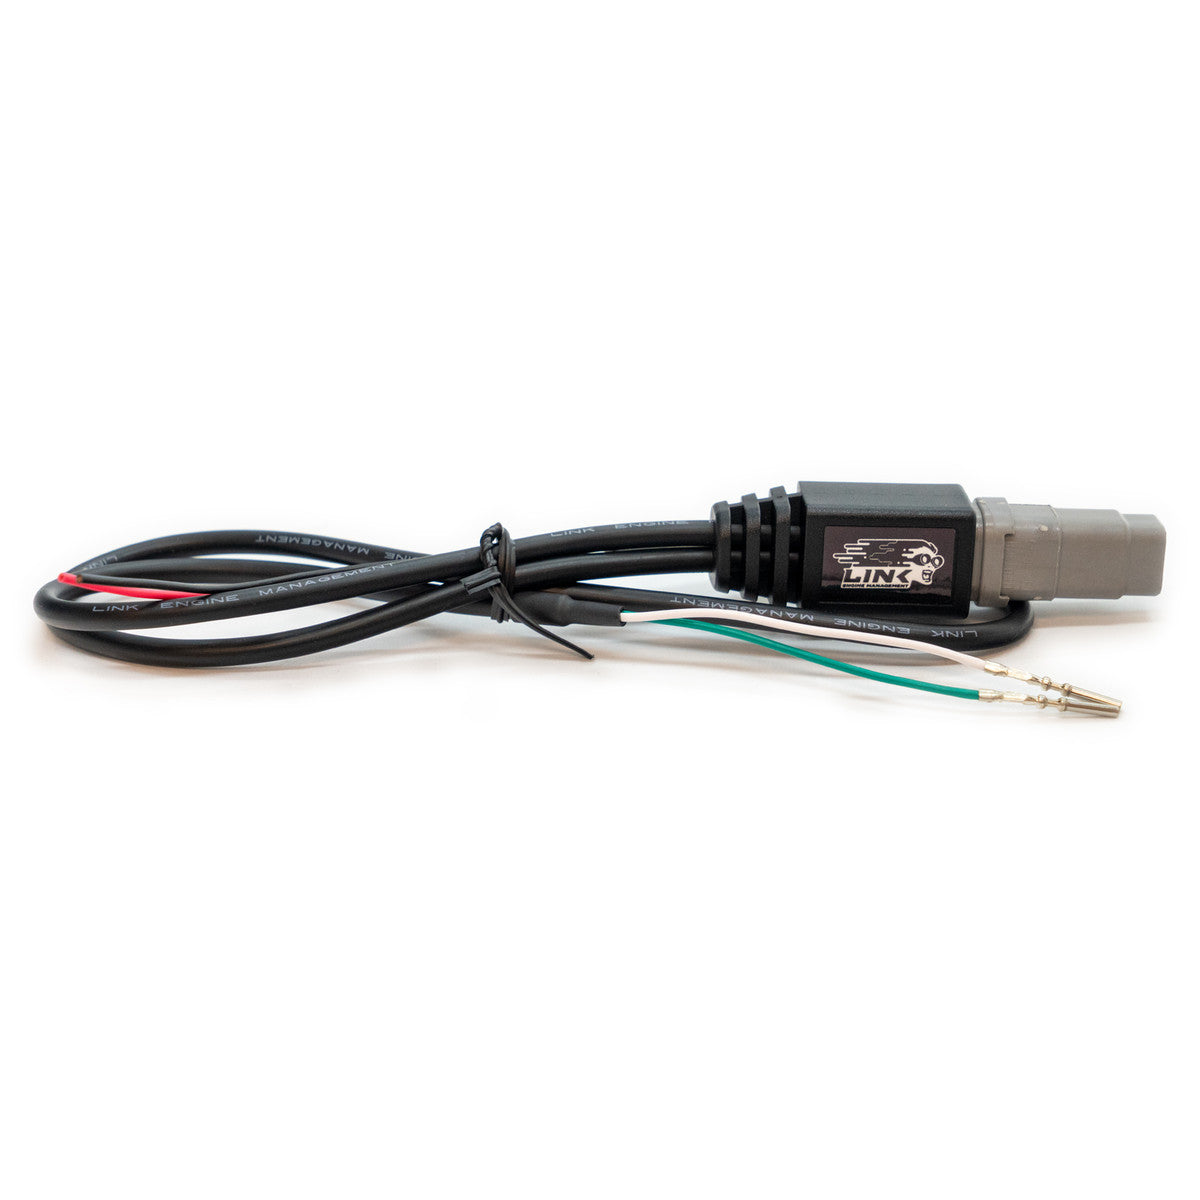 Link ECU CANSS - CAN Connection Cable for WireIn ECU’s (ECU Header CAN)